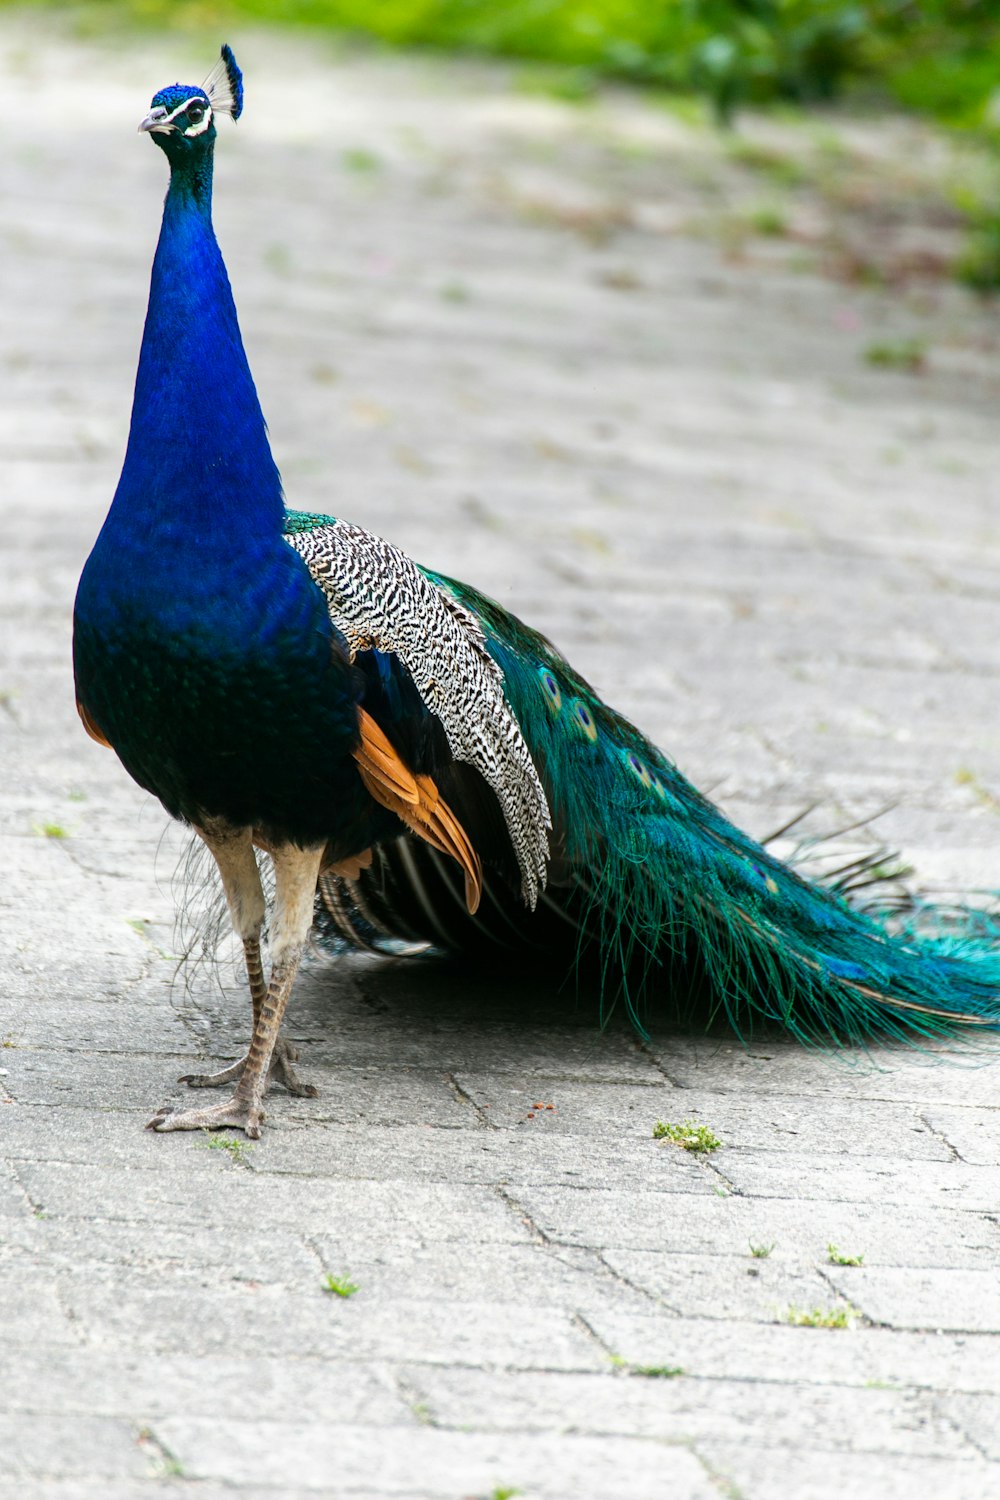 a peacock standing on a sidewalk with its feathers spread out